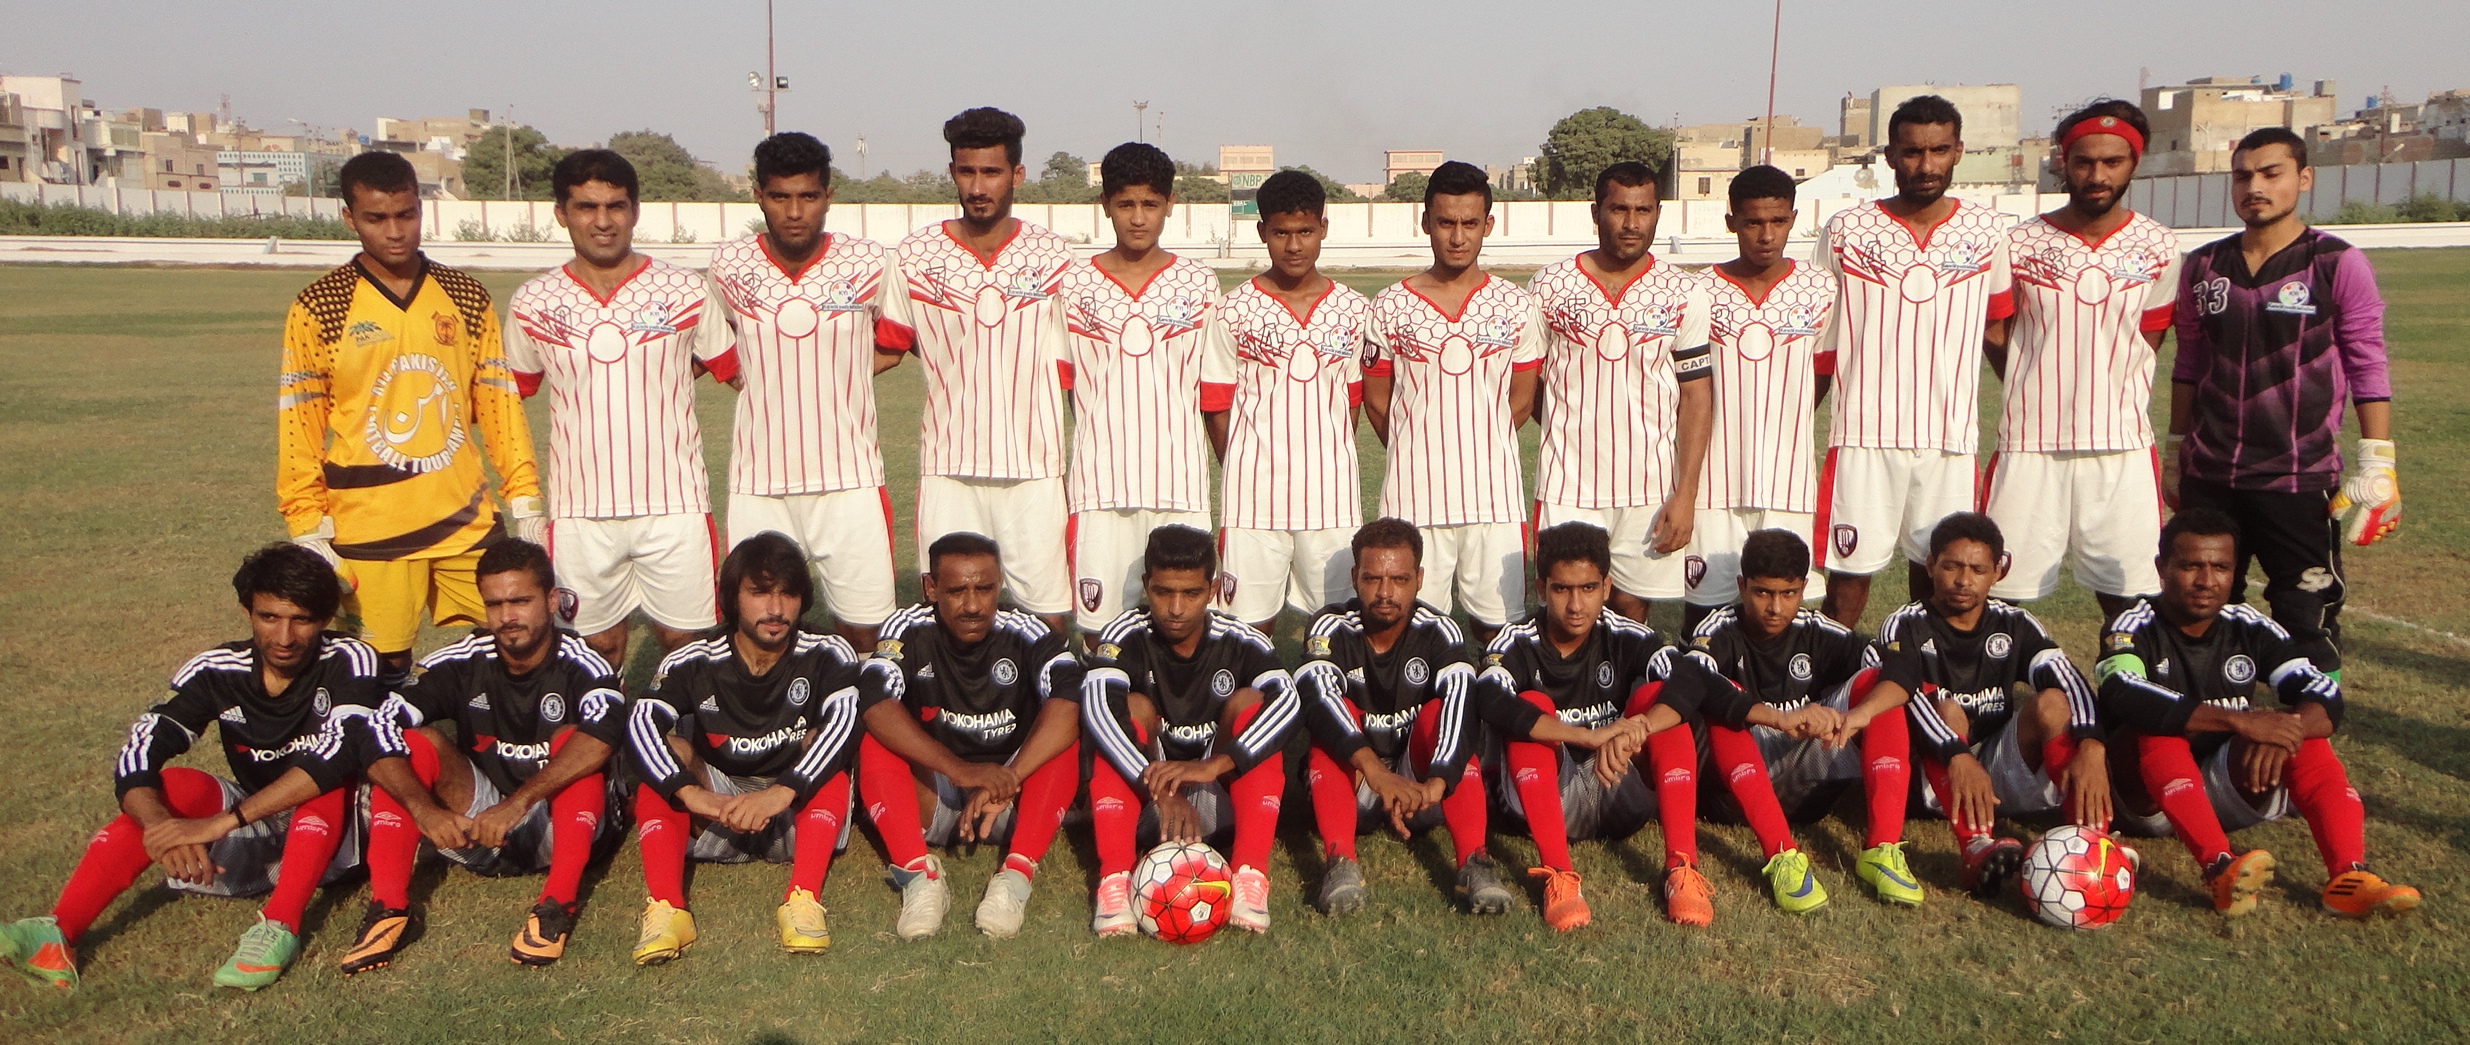 Baloch Mujahid and All Brothers book berth in semis